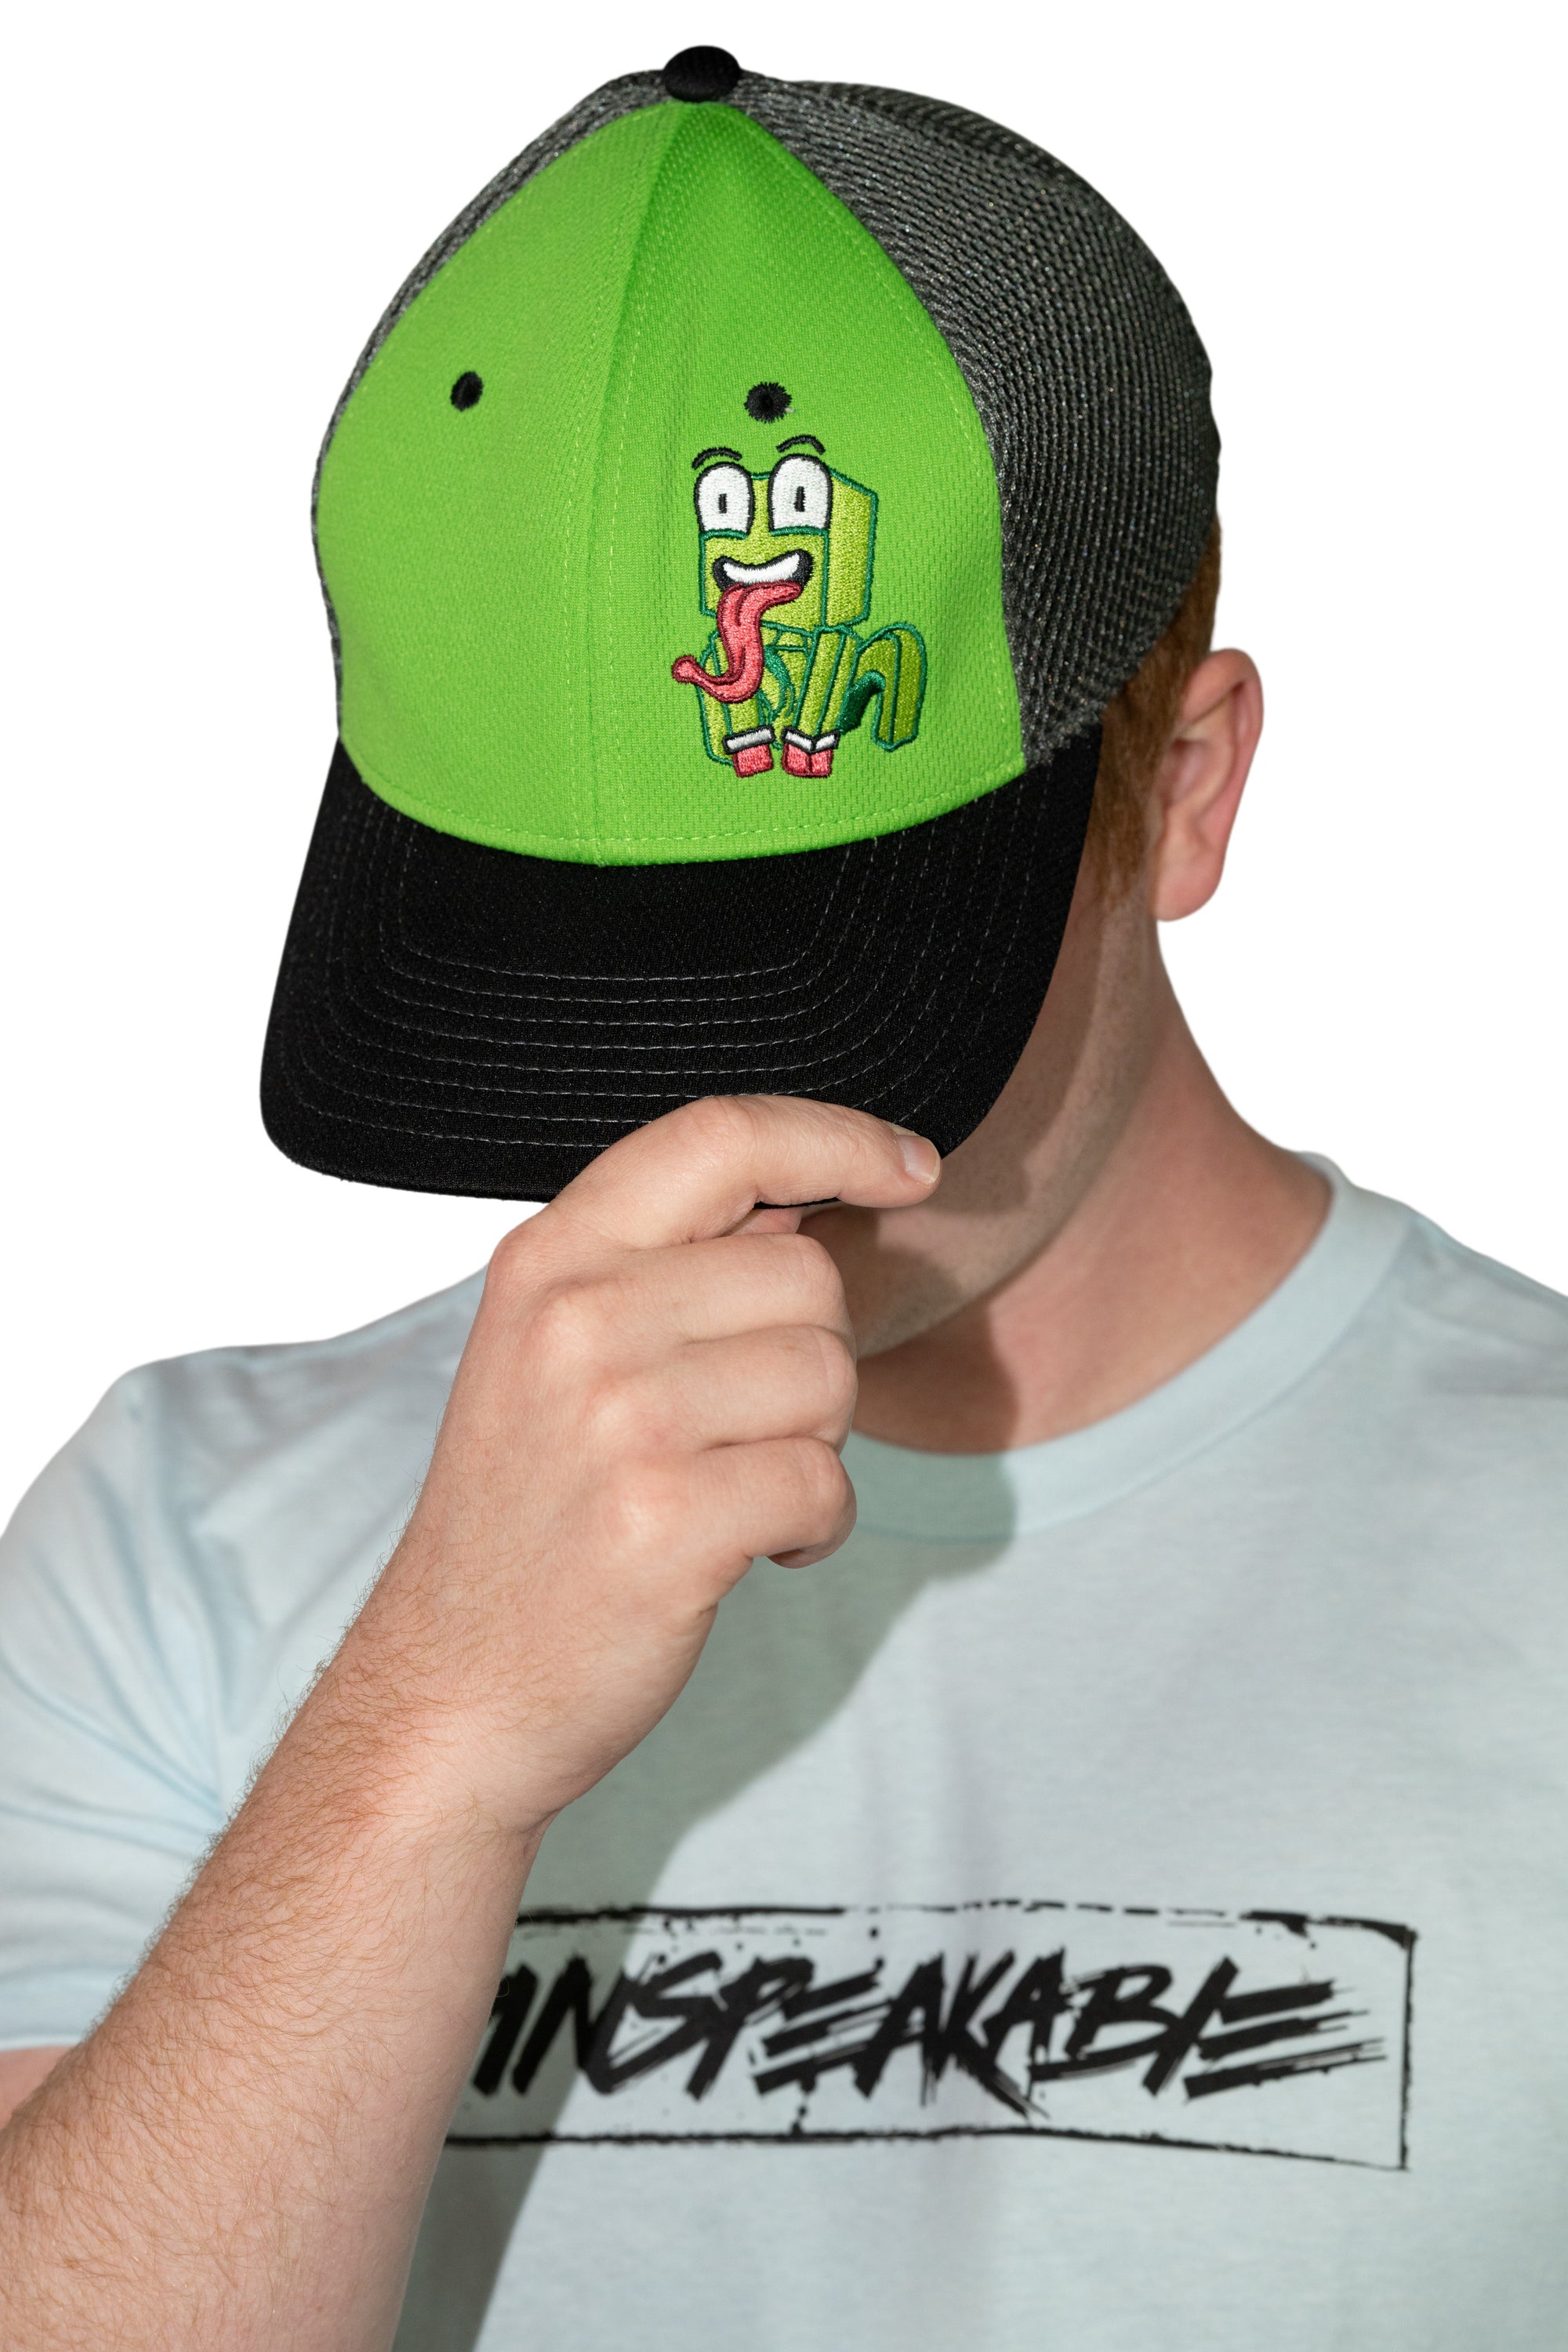 CROUCHING ICON LIME HAT - UnspeakableGaming